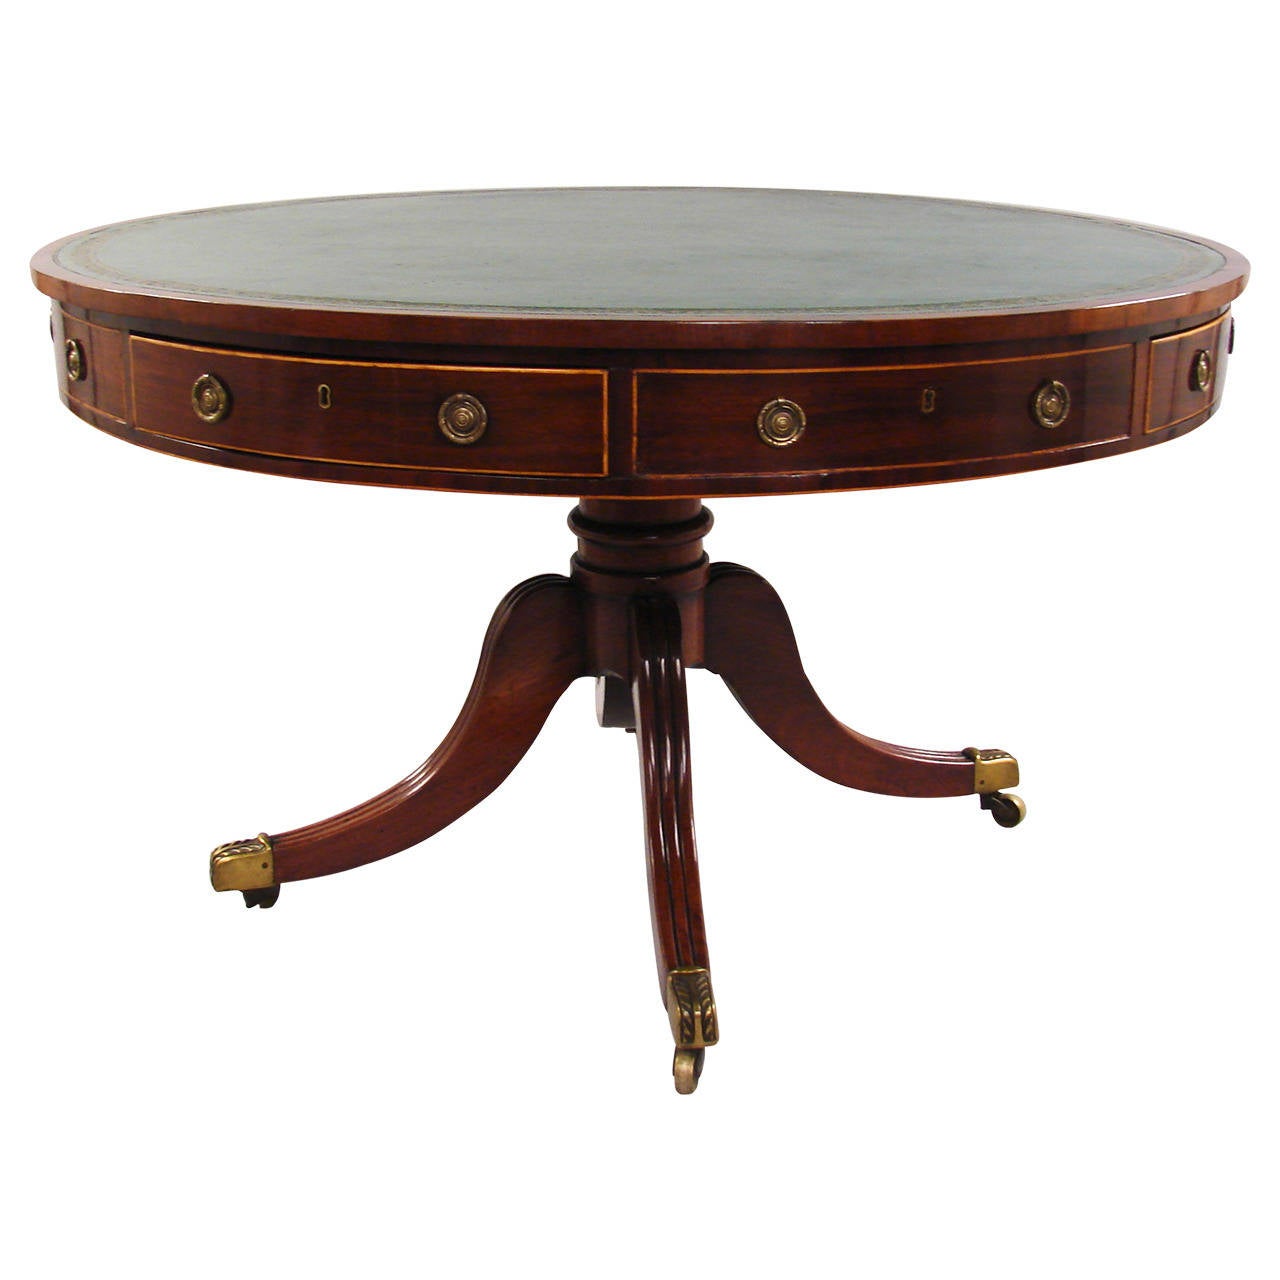 A good quality English Regency period mahogany drum table, the inset green gilt tooled leather top above four functional and four false inlaid frieze drawers, supported on a reeded quadripartite base ending in brass casters.